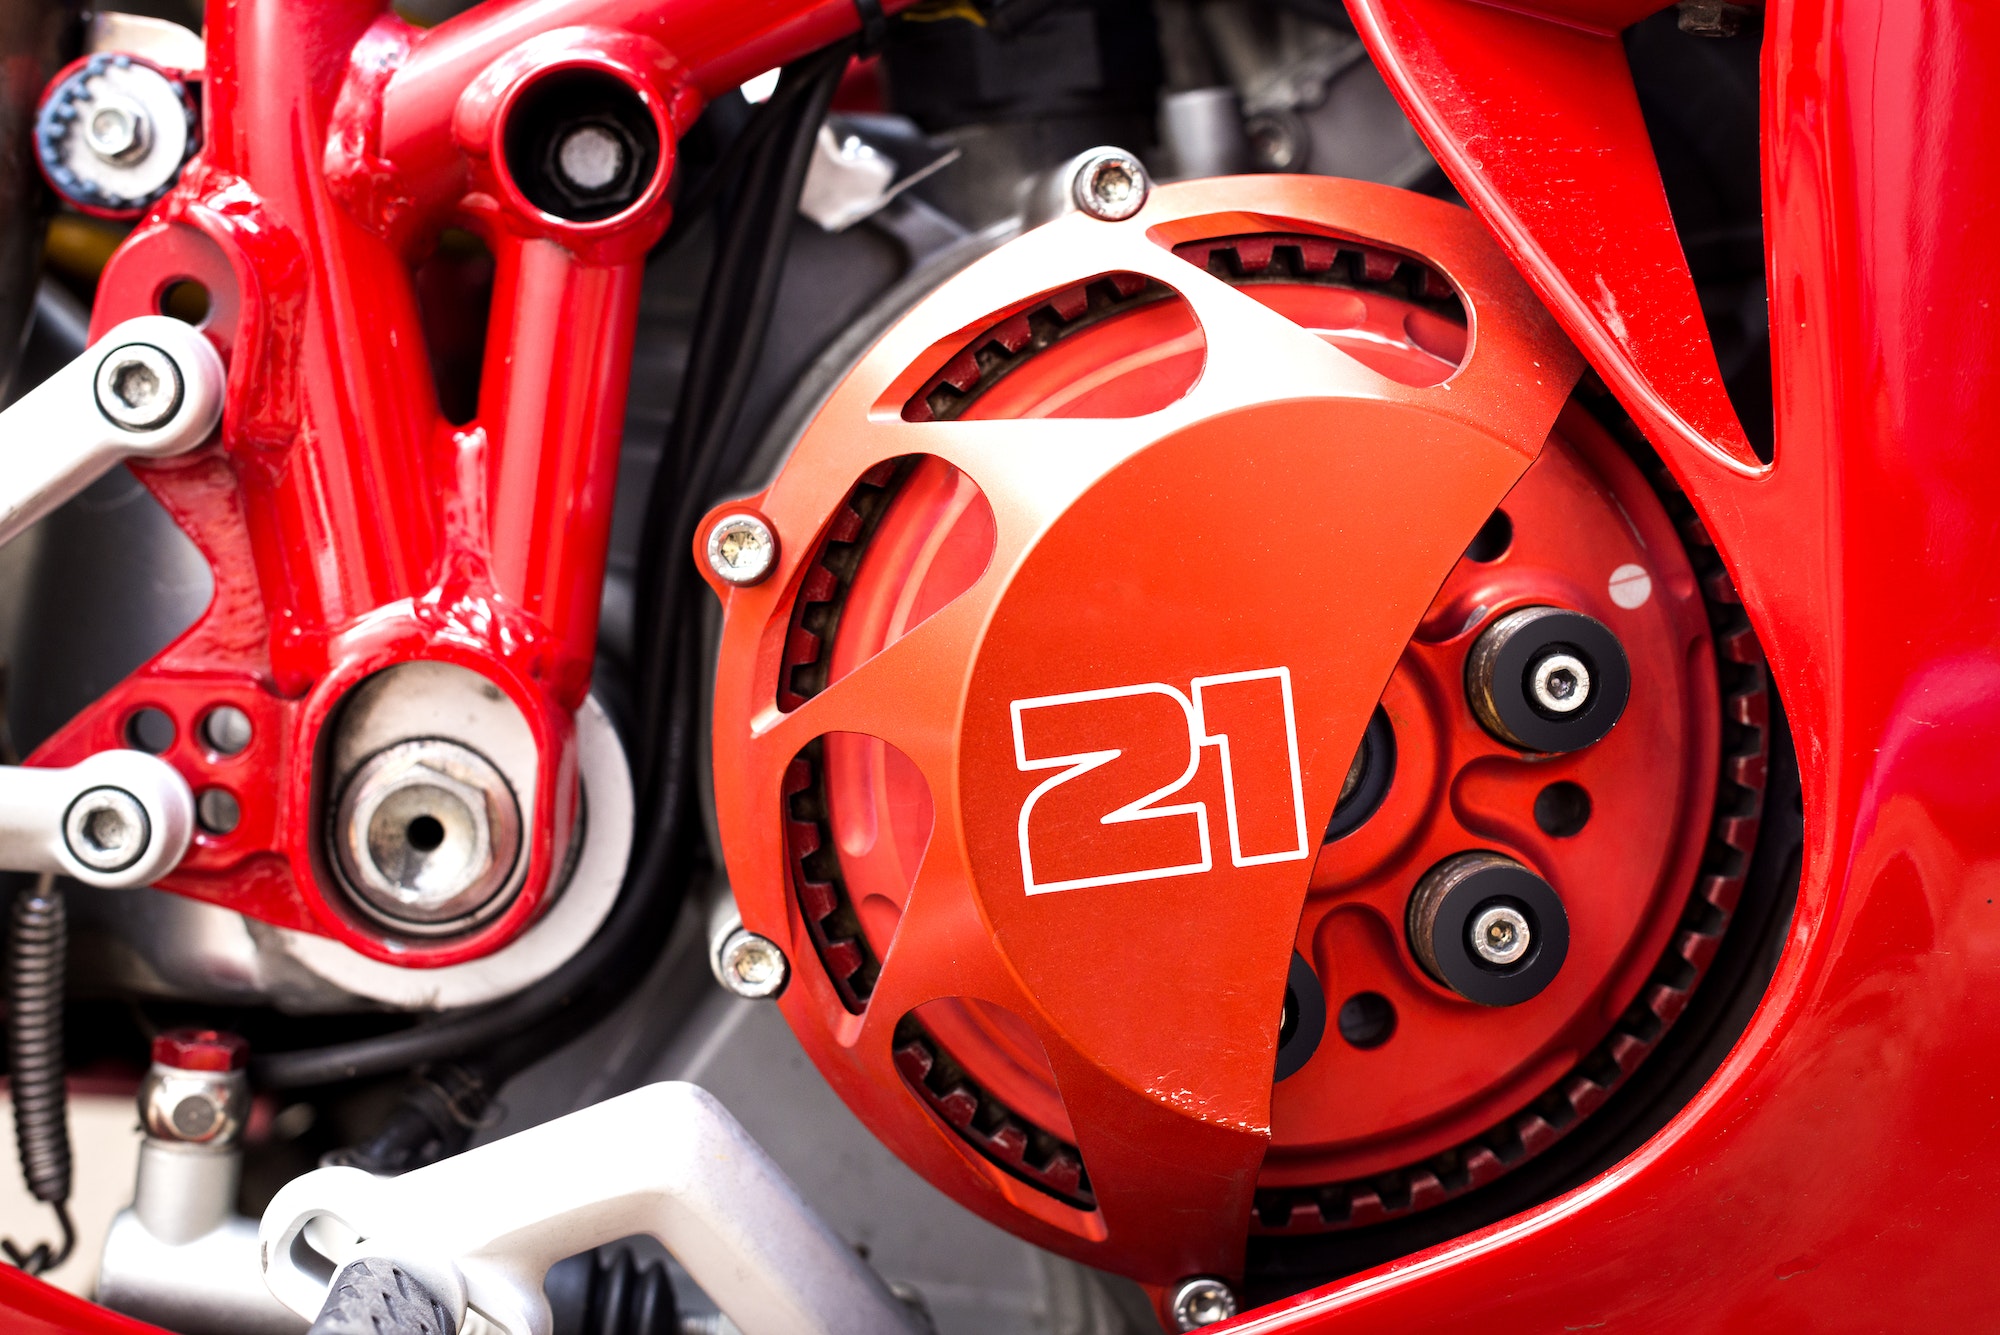 Red Sport motorcycle details close-up